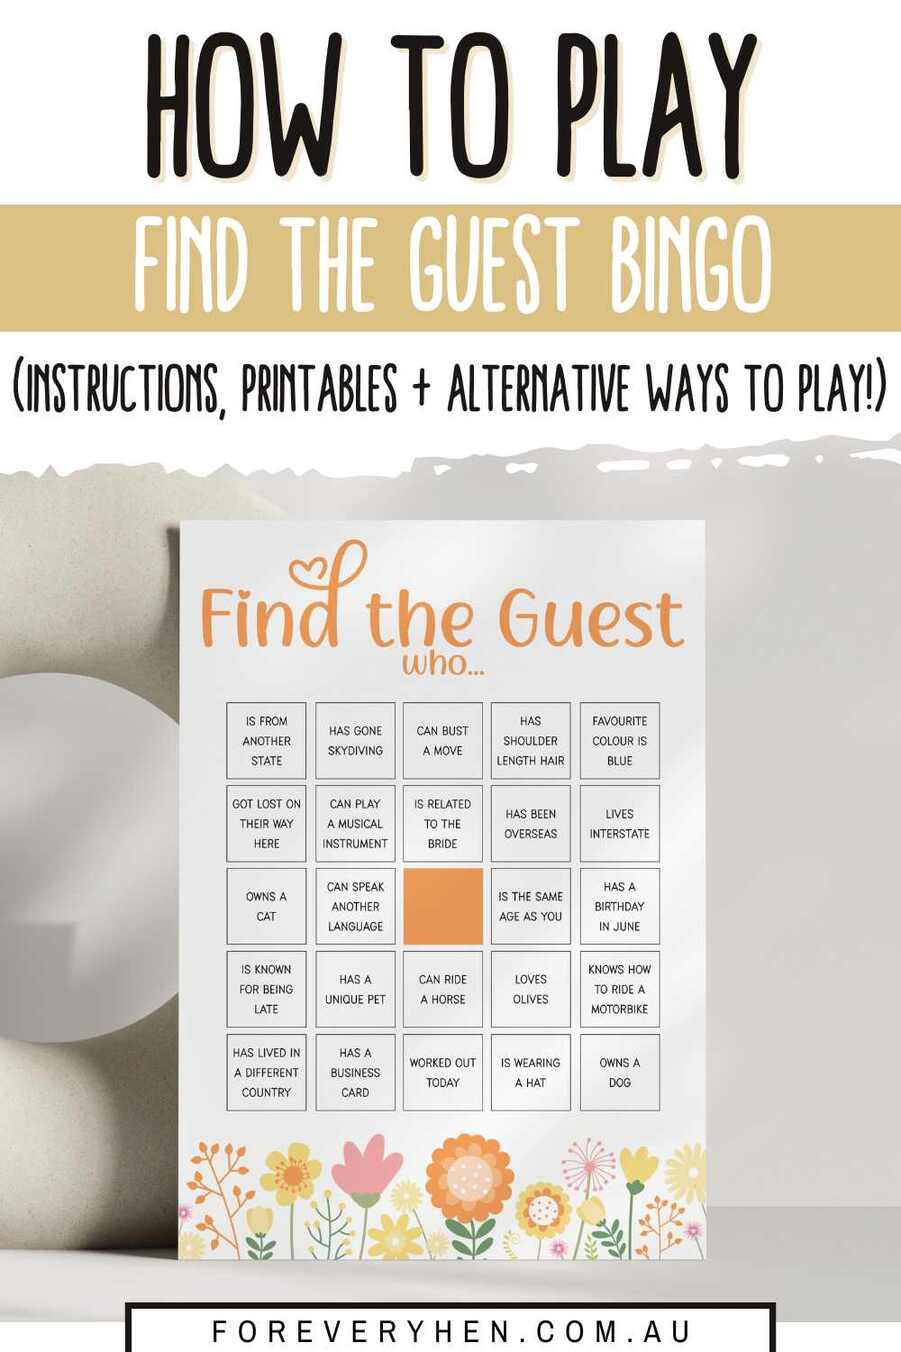 Find the guest bingo printable. Text overlay: How to play find the guest bingo (instructions, printables and alternative ways to play!)